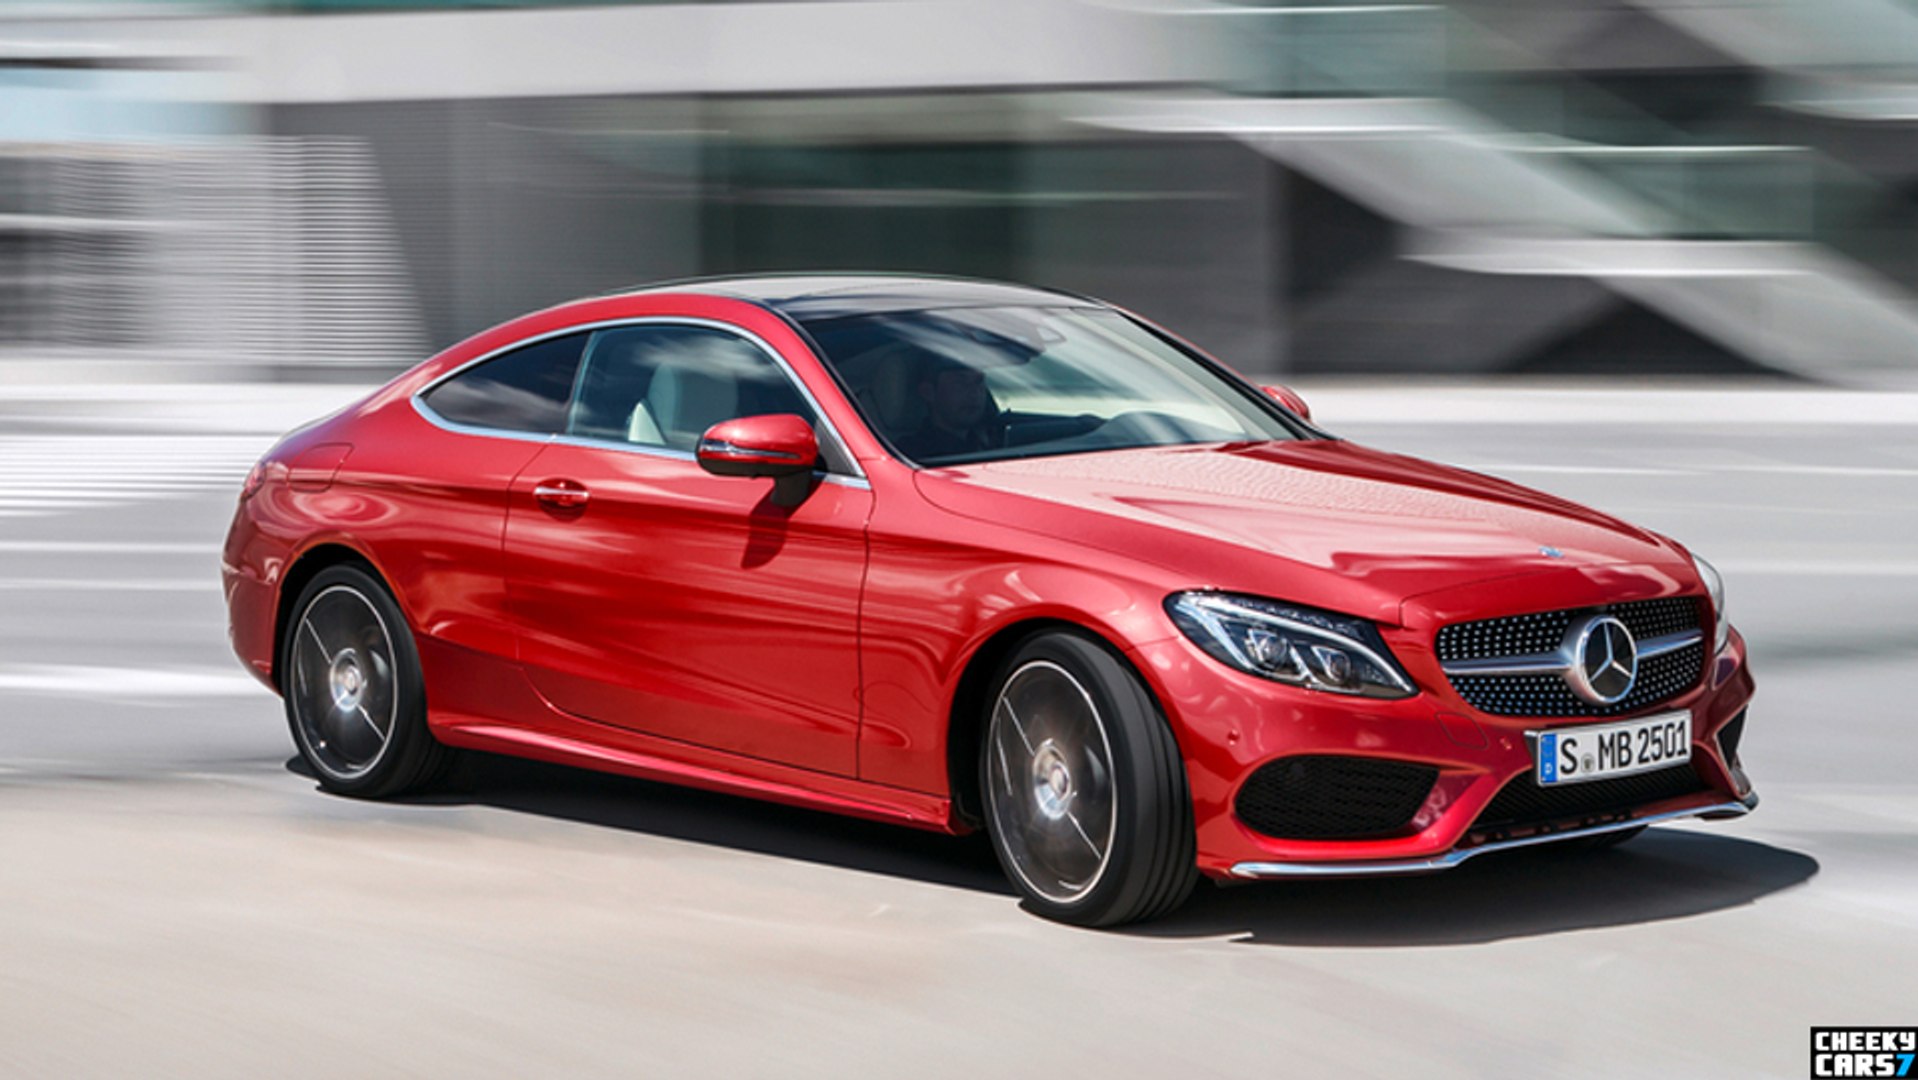 New Mercedes C Class Coupe 2015 interior and exterior / Mercedes-Benz C-Class  Coupé 2016 - video Dailymotion